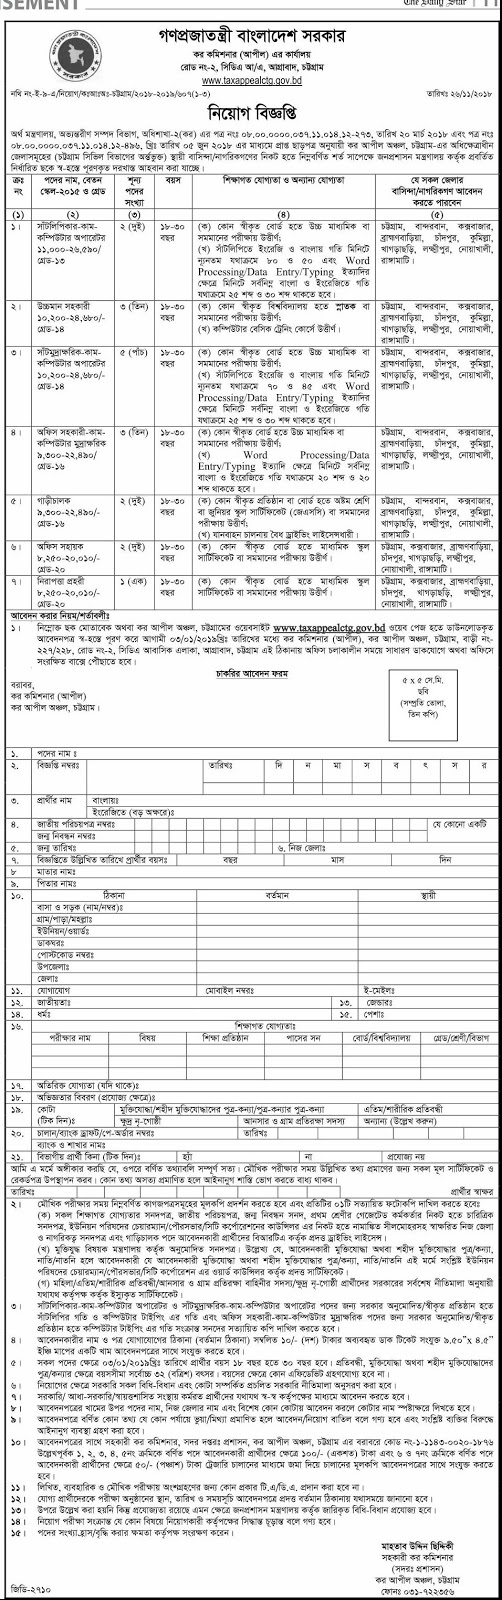 Income Tax Appeal Office, Chattogram Job Circular 2018